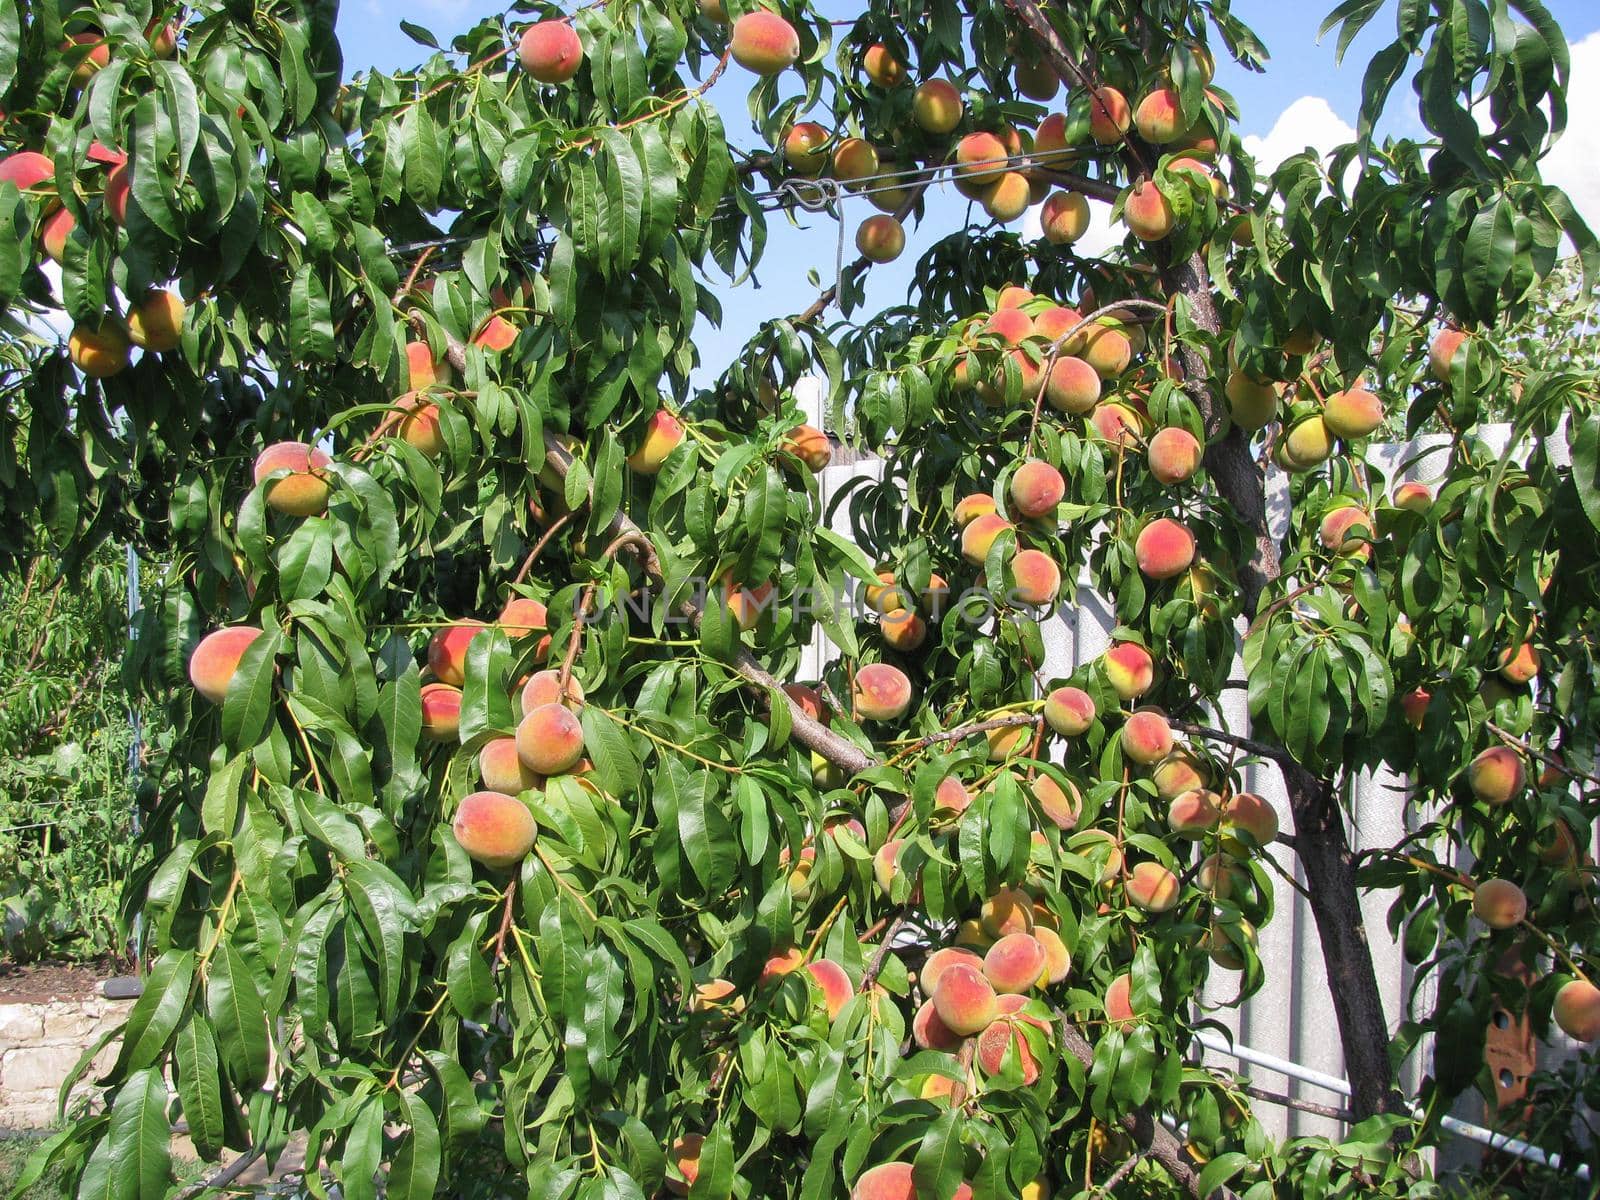 ripe peaches on a tree with green leaves in the sun, summer fruit harvest,garden by KaterinaDalemans